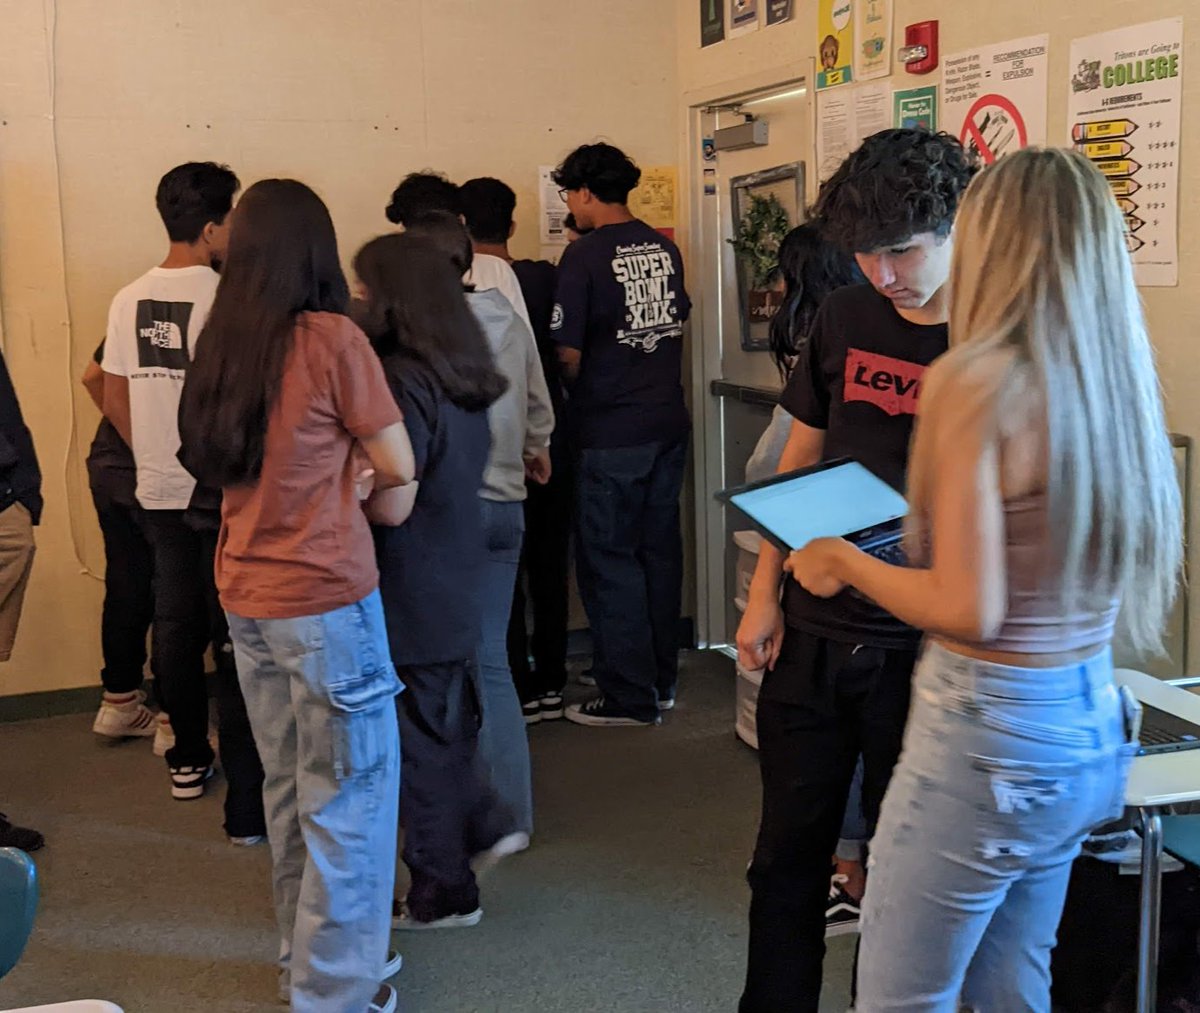 .@SonnySajor and I continued our #DataScience tour around @OxnardUnion today visiting @ohs_jackets & @phs_tritons. Ms. Britton's students were figuring out the code behind some geometric shapes. @CrowCurious students were having great conversations around data. #WeAreOxnardUnion